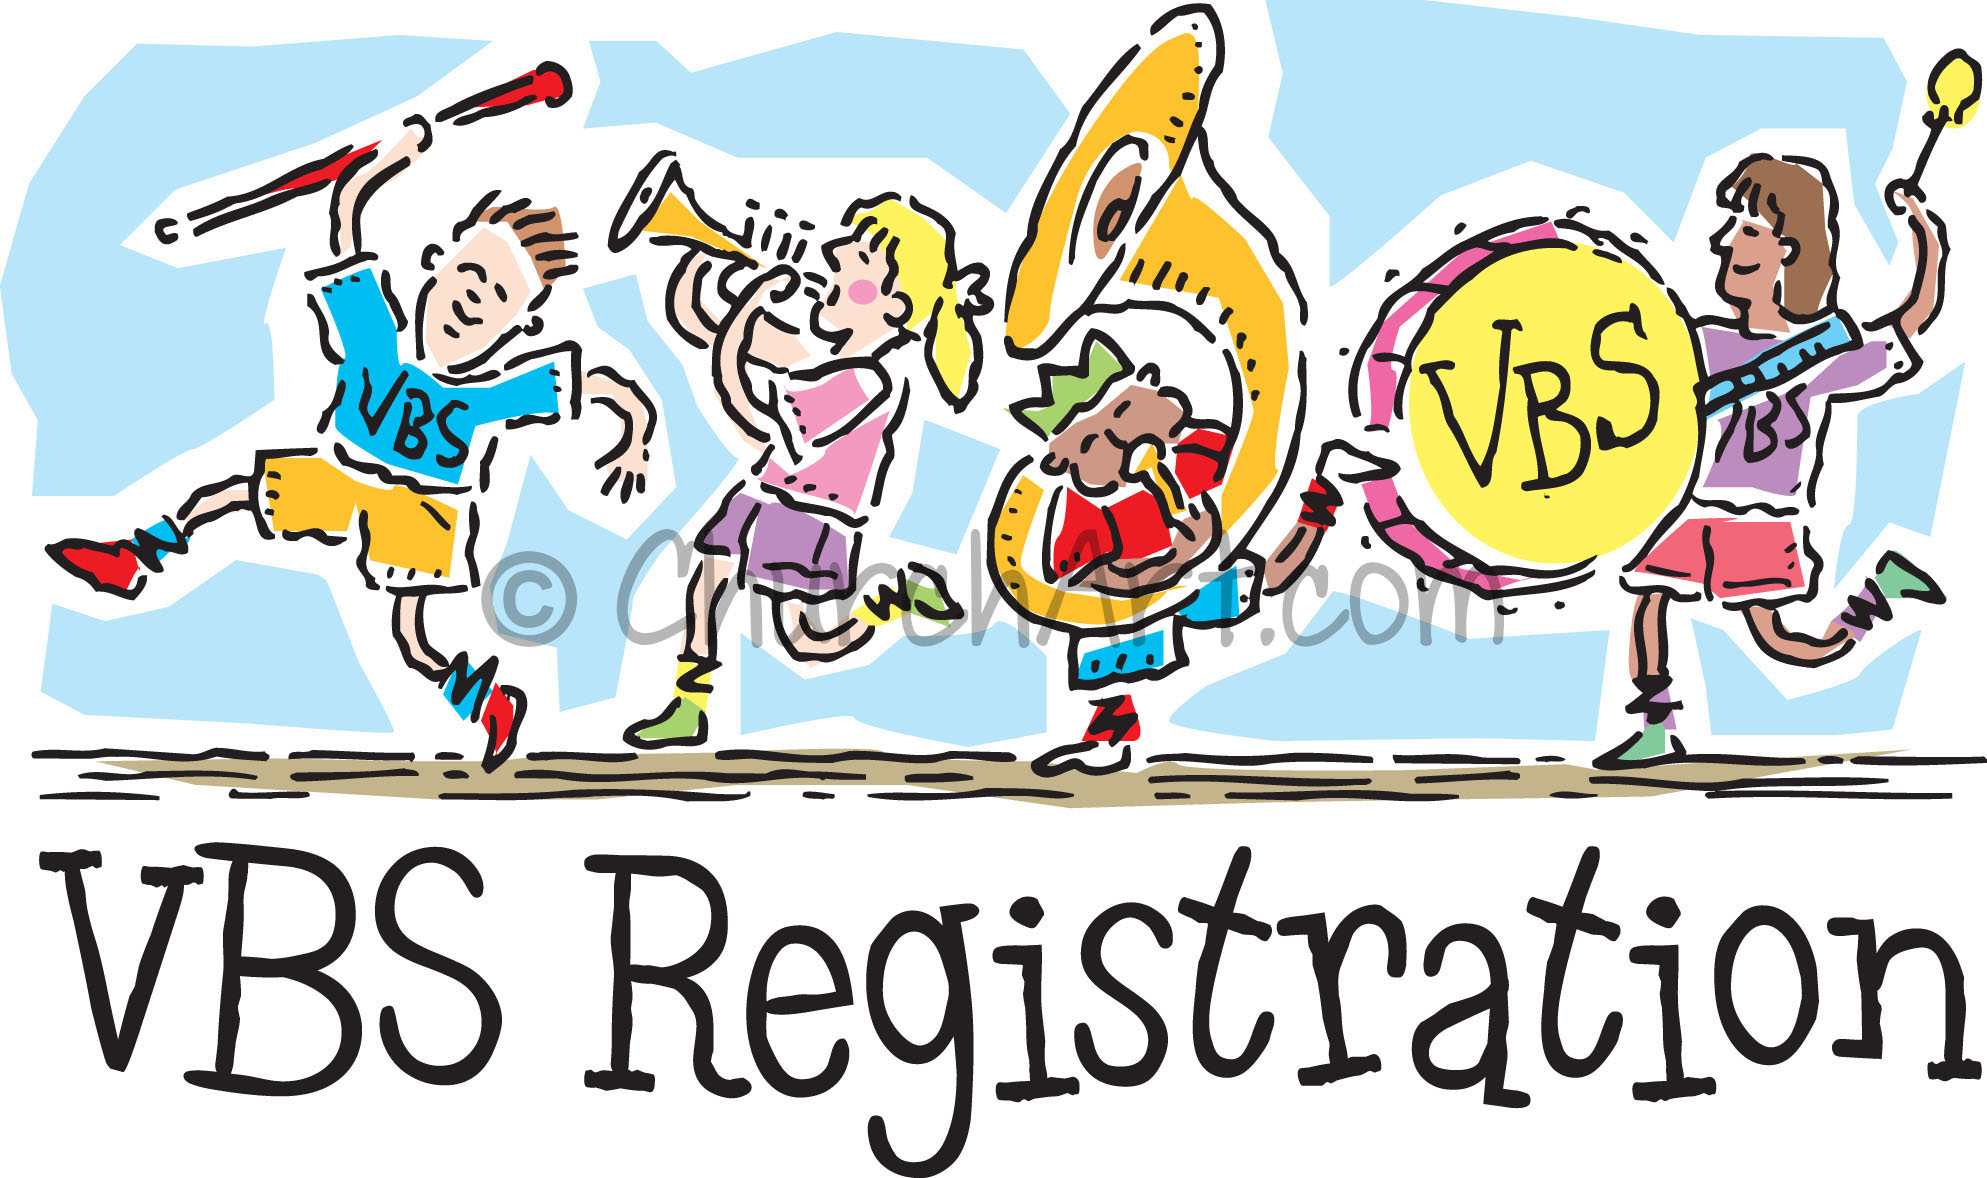 Vacation Bible school Registration graphic for students